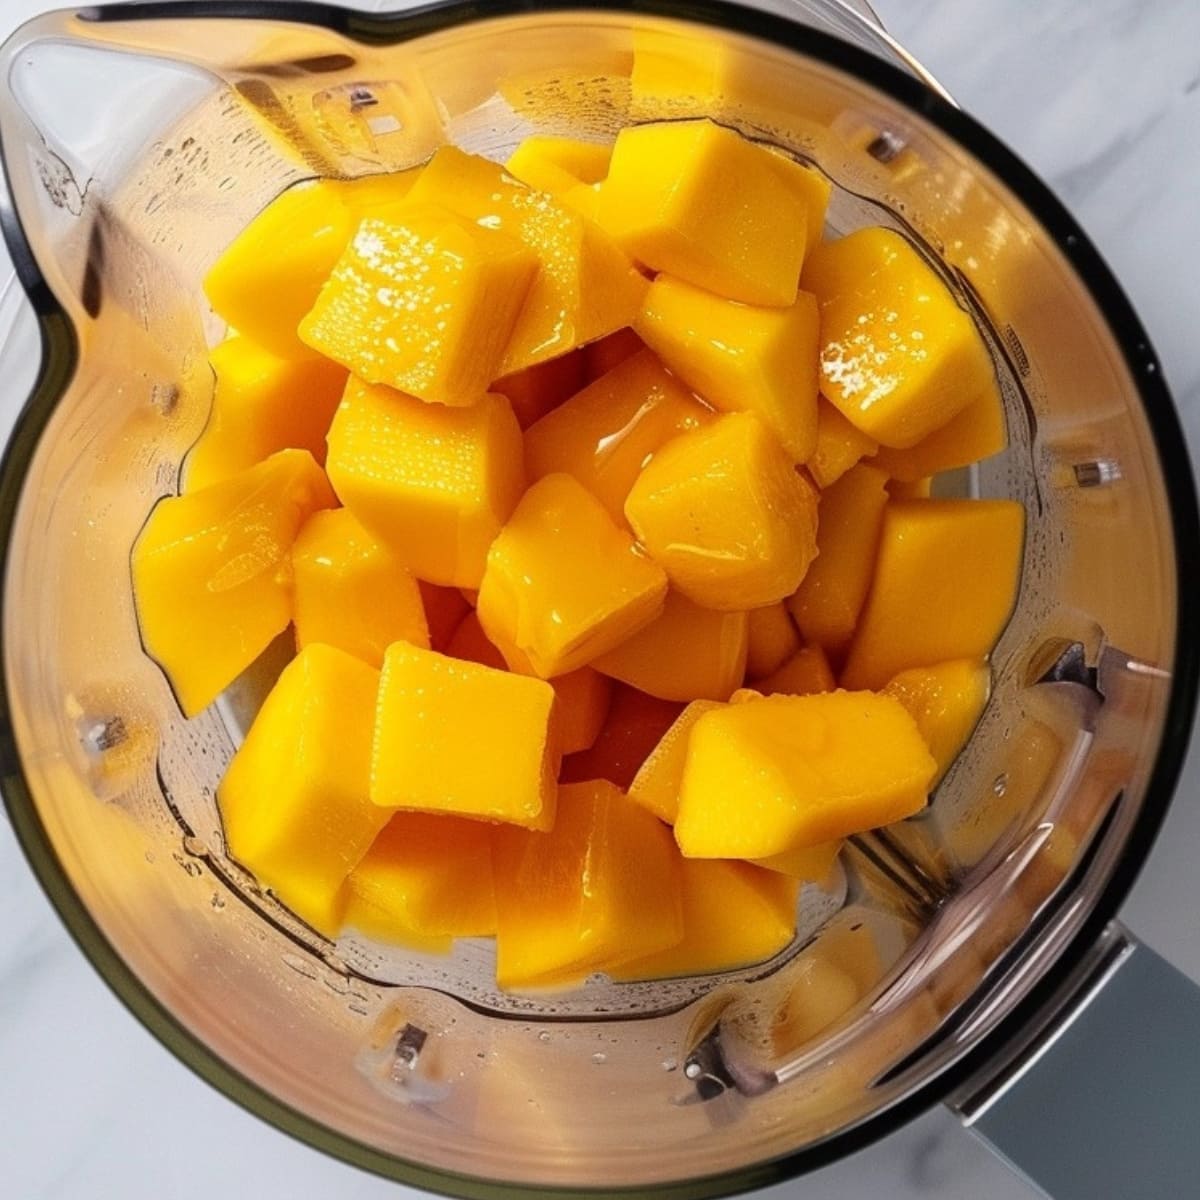 Cube cut ripe mangoes inside a blender pitcher with honey.